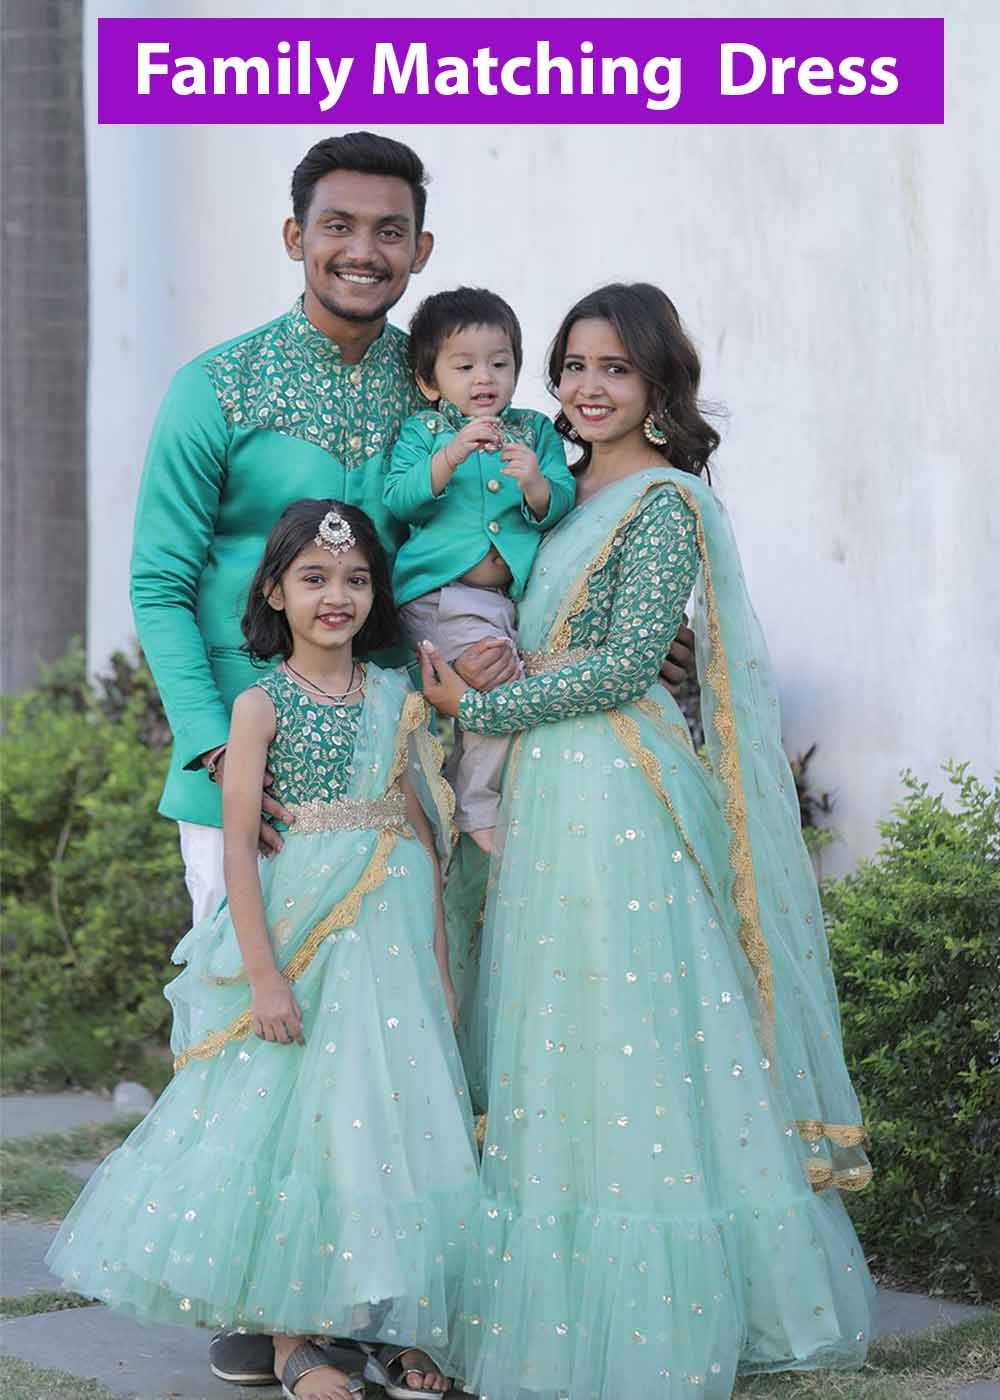 family matching dress for birthday party